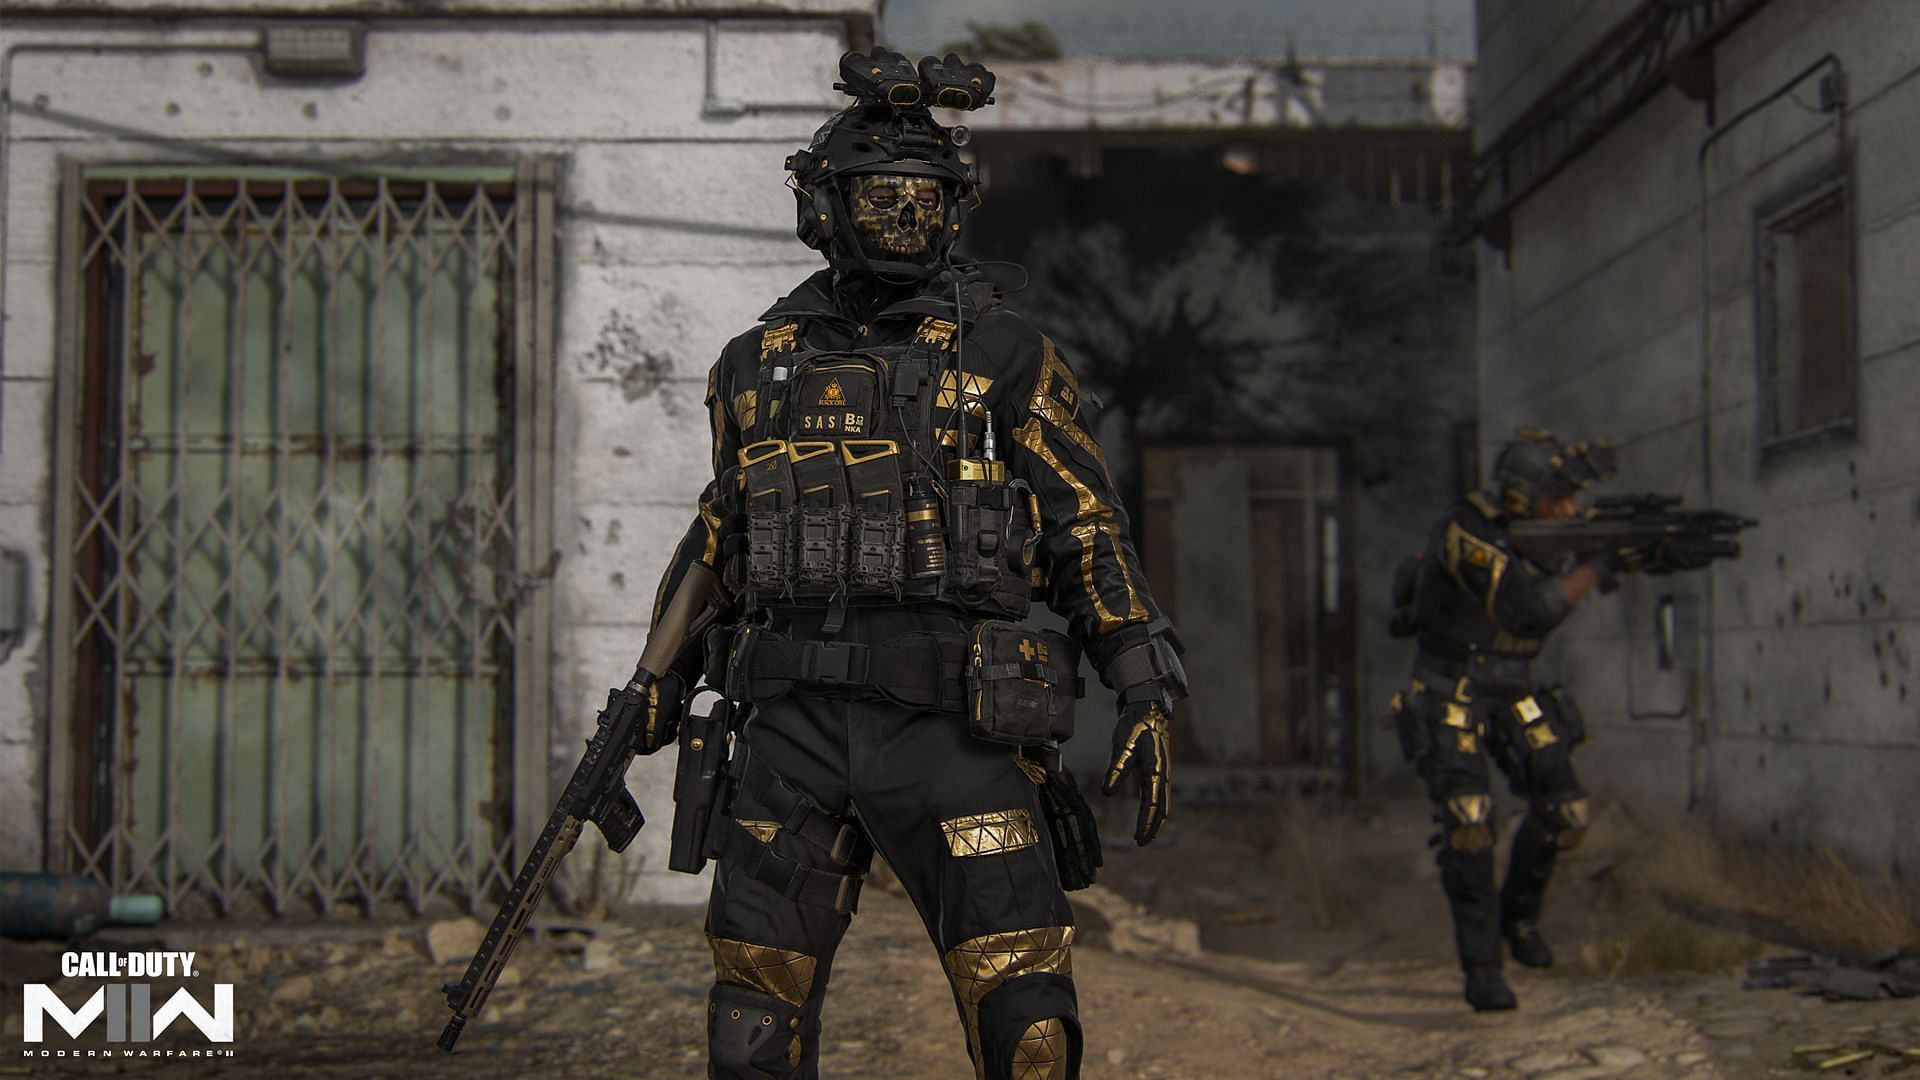 Community is dissatisfied with the leaked operators in Modern Warfare 2 (Image via Activision)